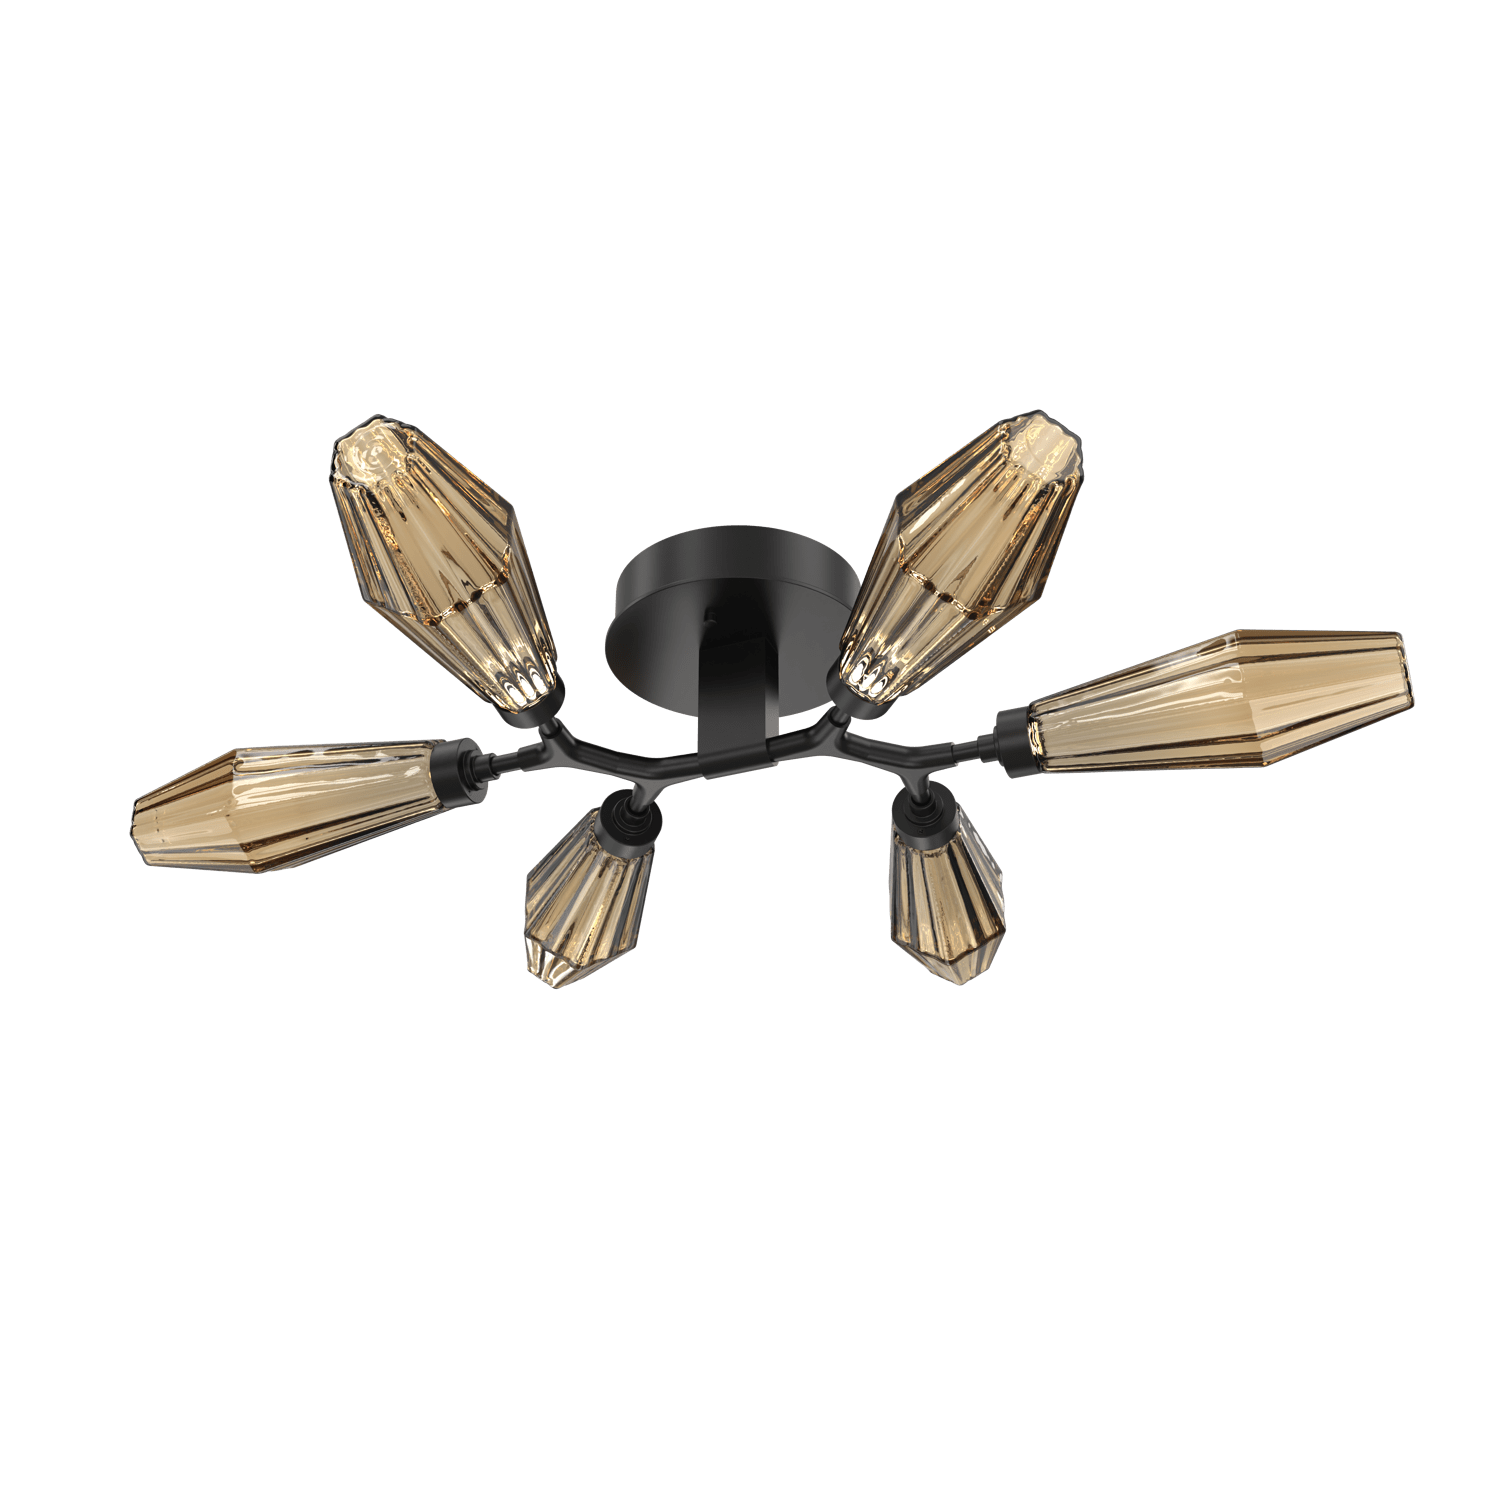 CLB0049-01-MB-RB-Hammerton-Studio-Aalto-6-light-organic-flush-mount-light-with-matte-black-finish-and-optic-ribbed-bronze-glass-shades-and-LED-lamping